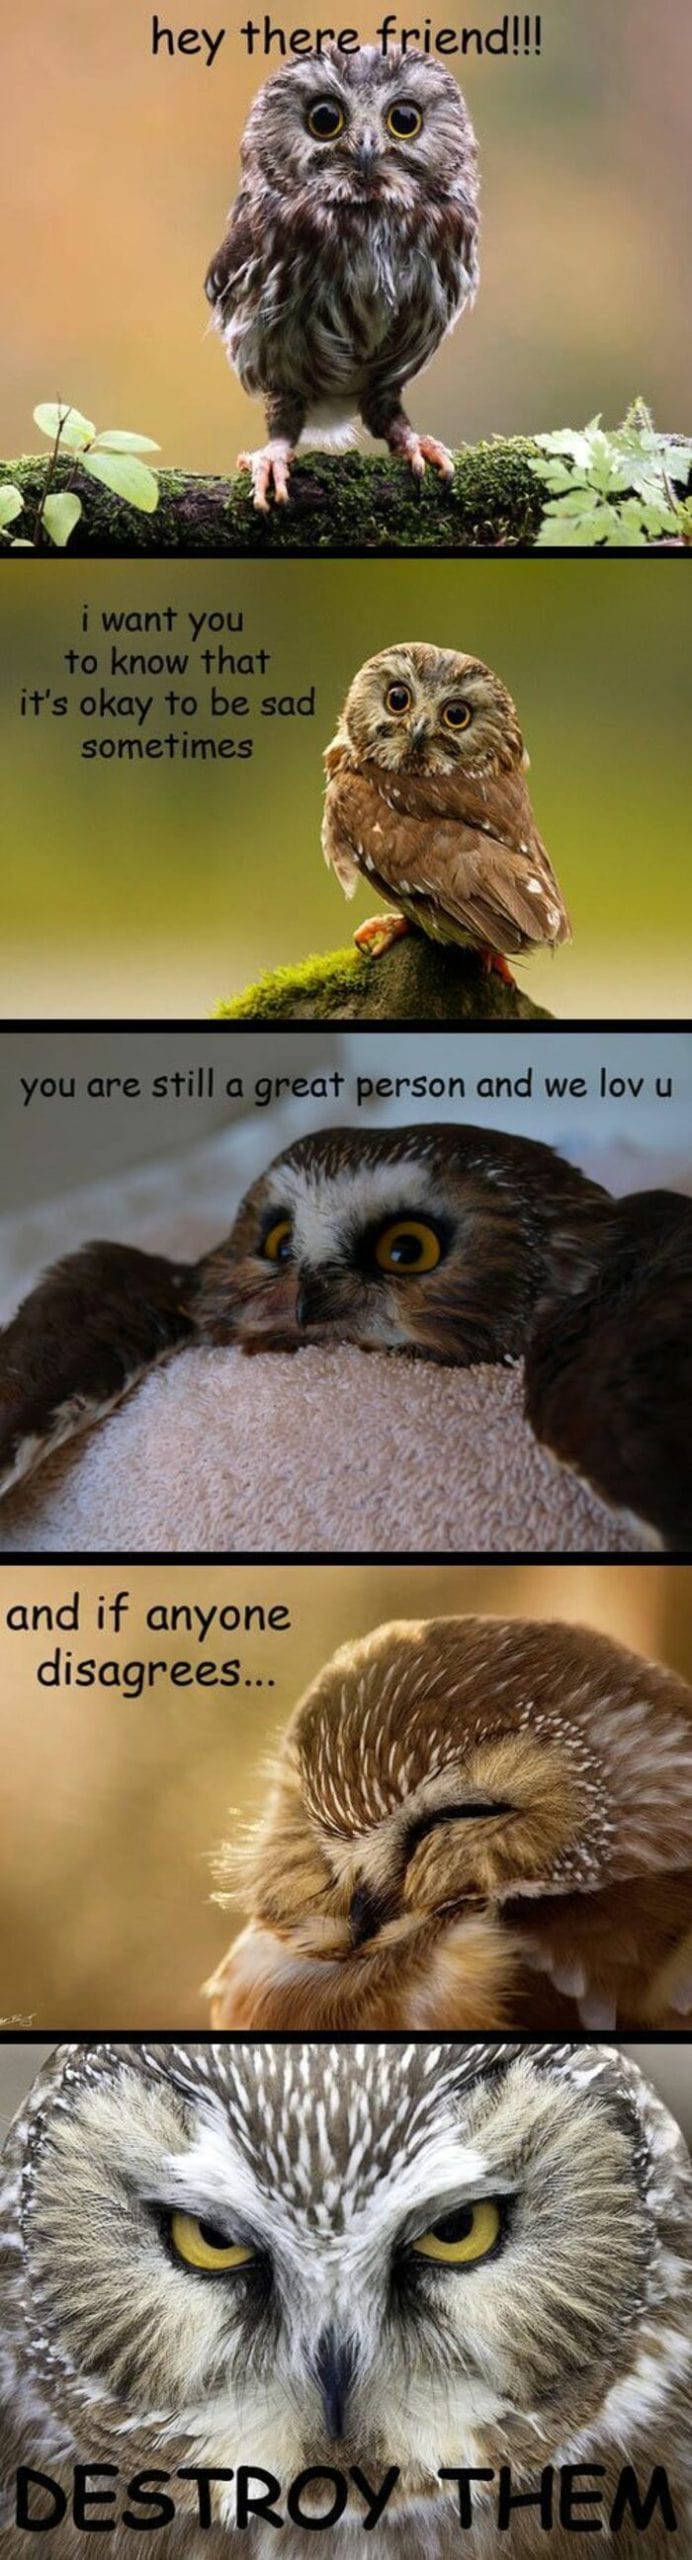 Owl Memes - Hey there friend! I want you to know that it is OK to be sad sometimes, you are still a great person and we love you and if anyone disagrees, destroy them